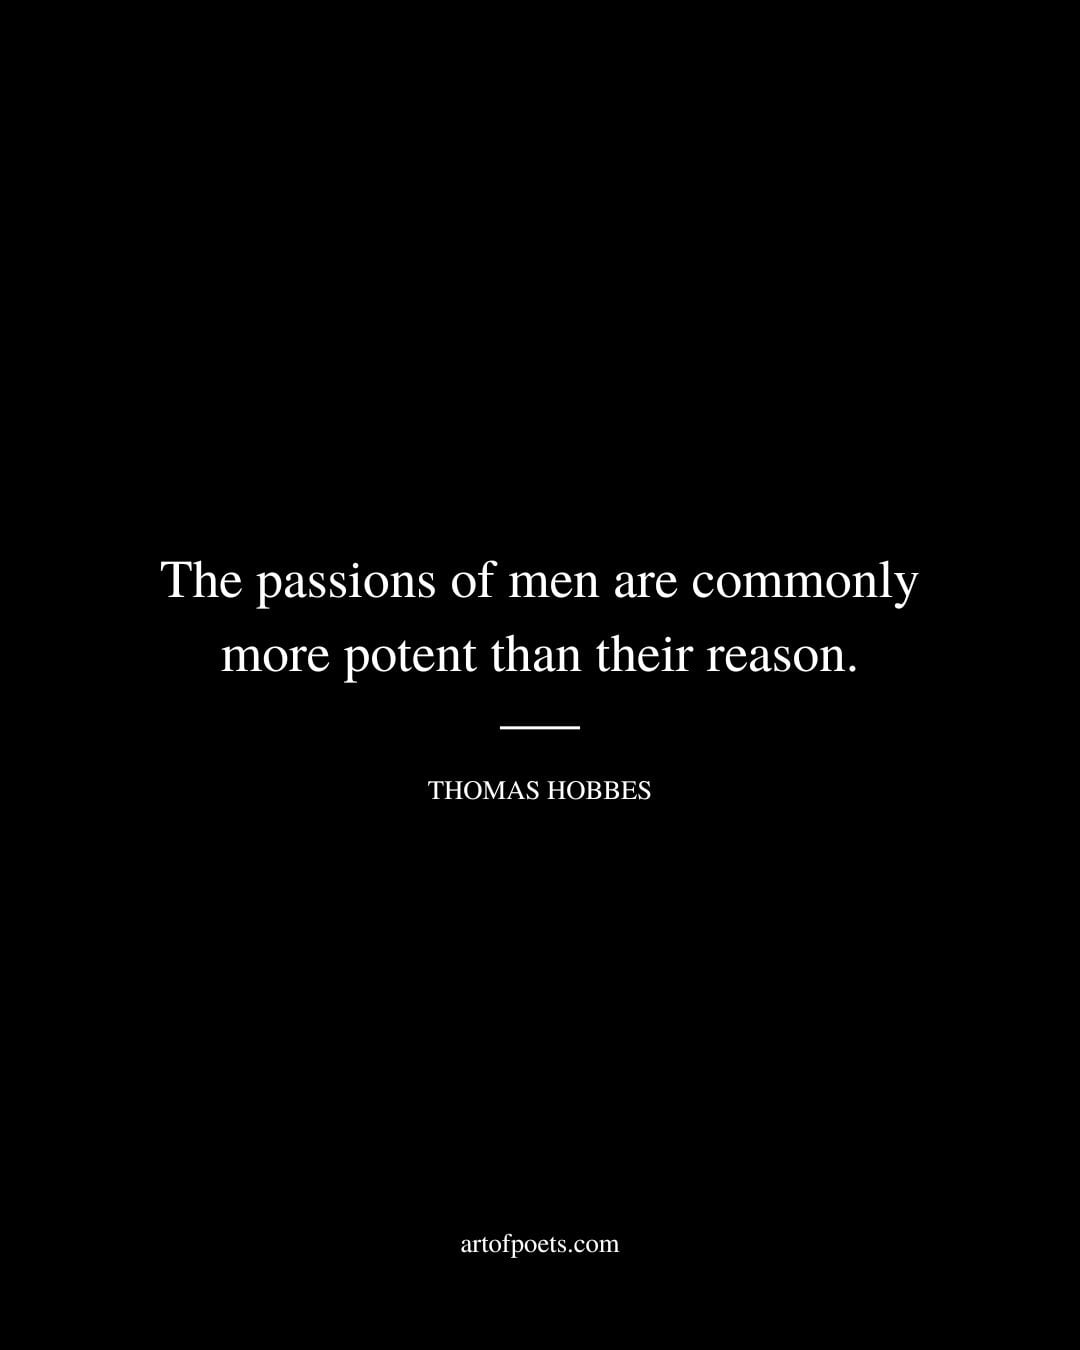 The passions of men are commonly more potent than their reason